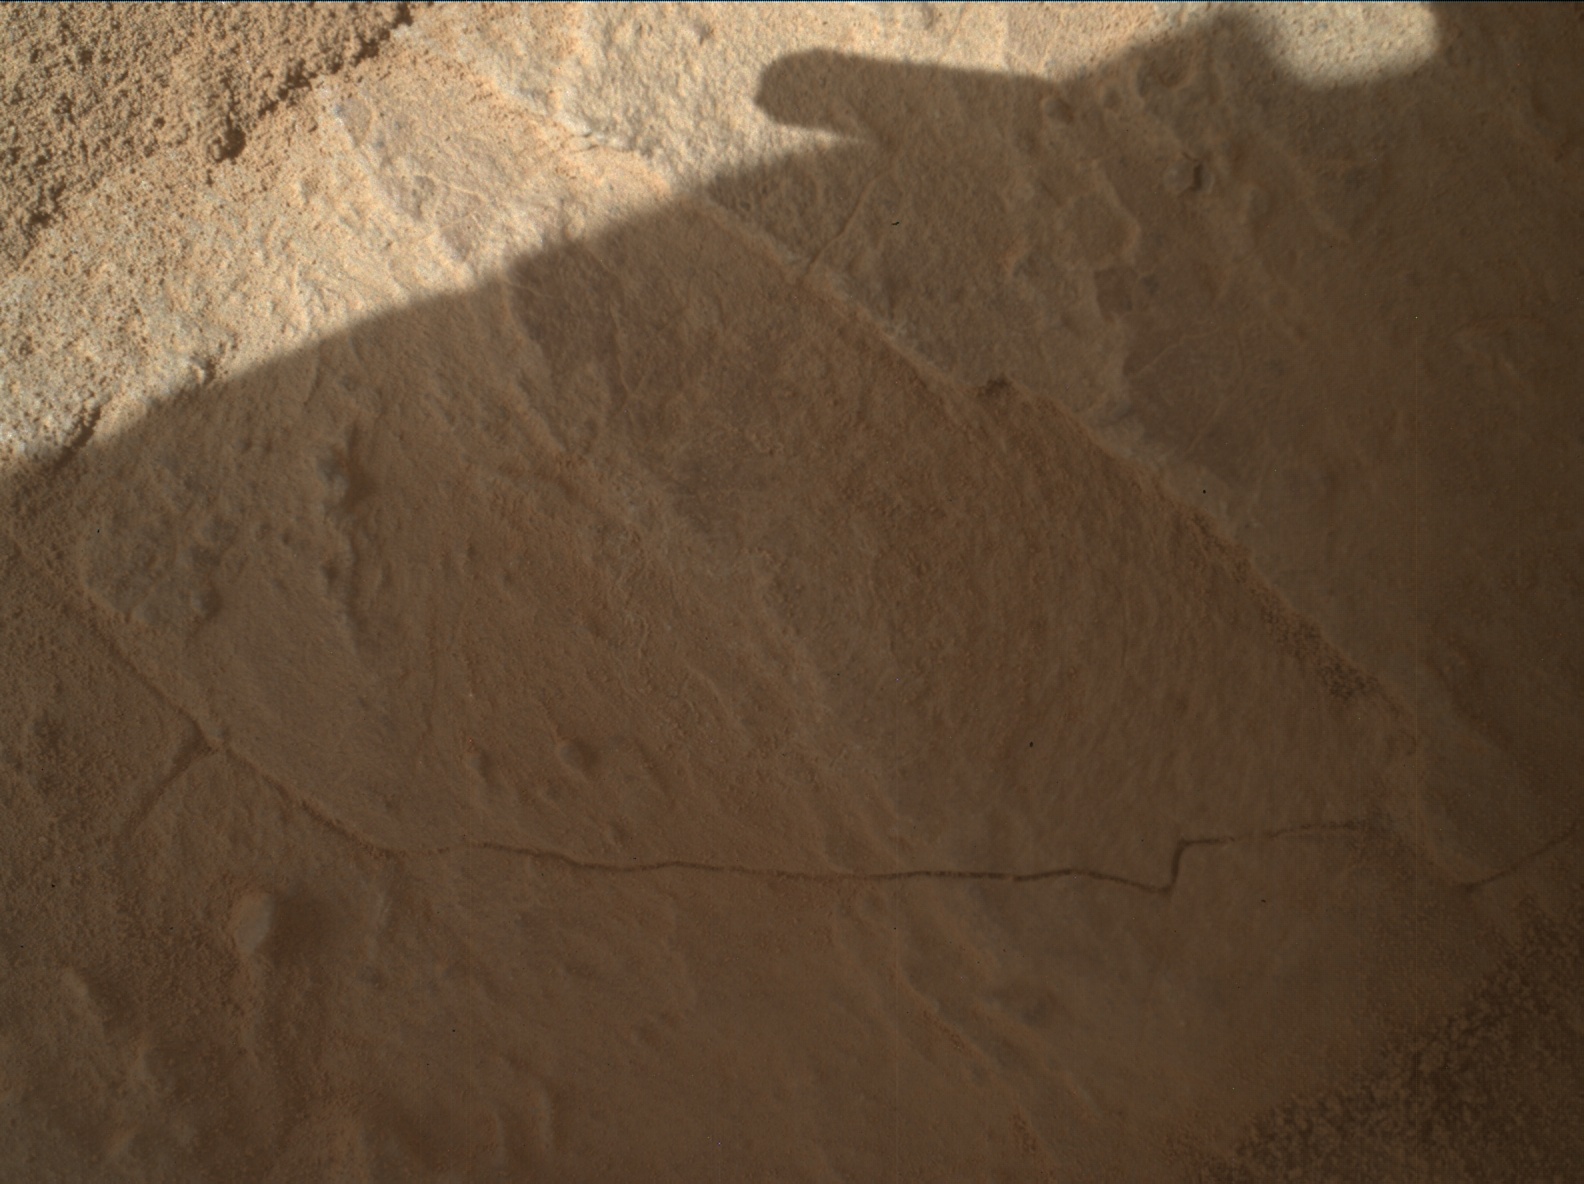 Nasa's Mars rover Curiosity acquired this image using its Mars Hand Lens Imager (MAHLI) on Sol 3906